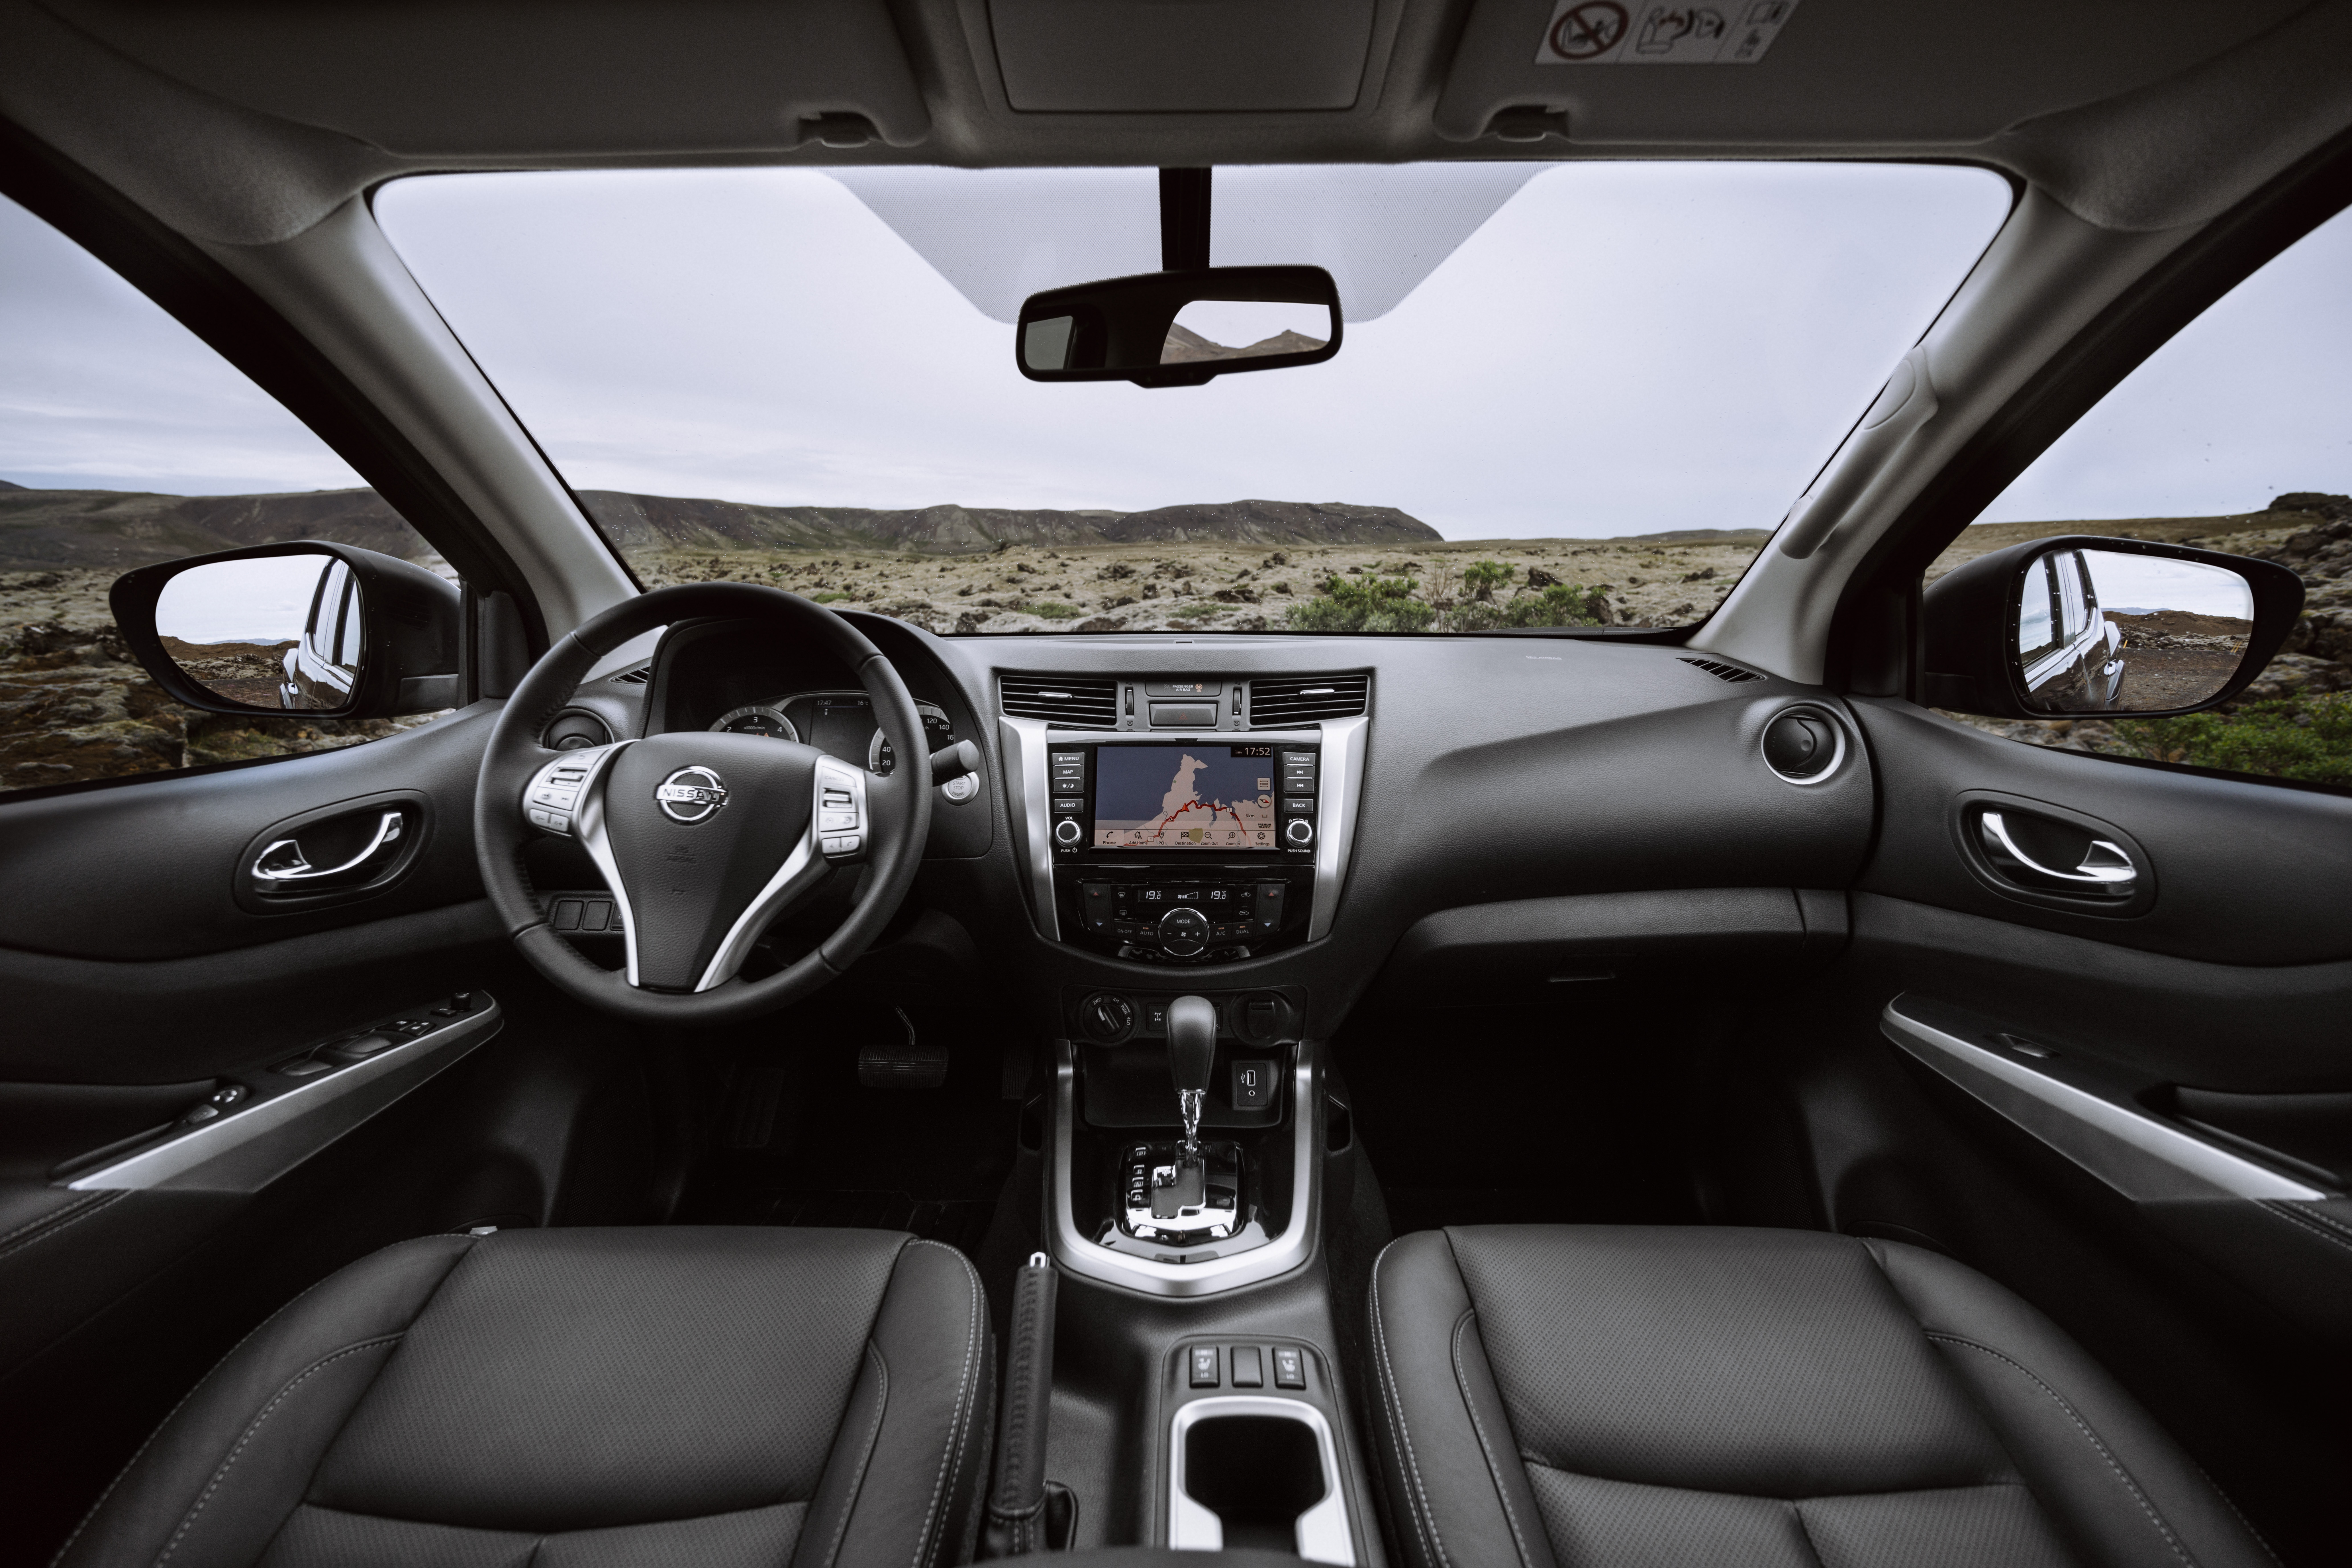 The interior now benefits from a larger infotainment screen 